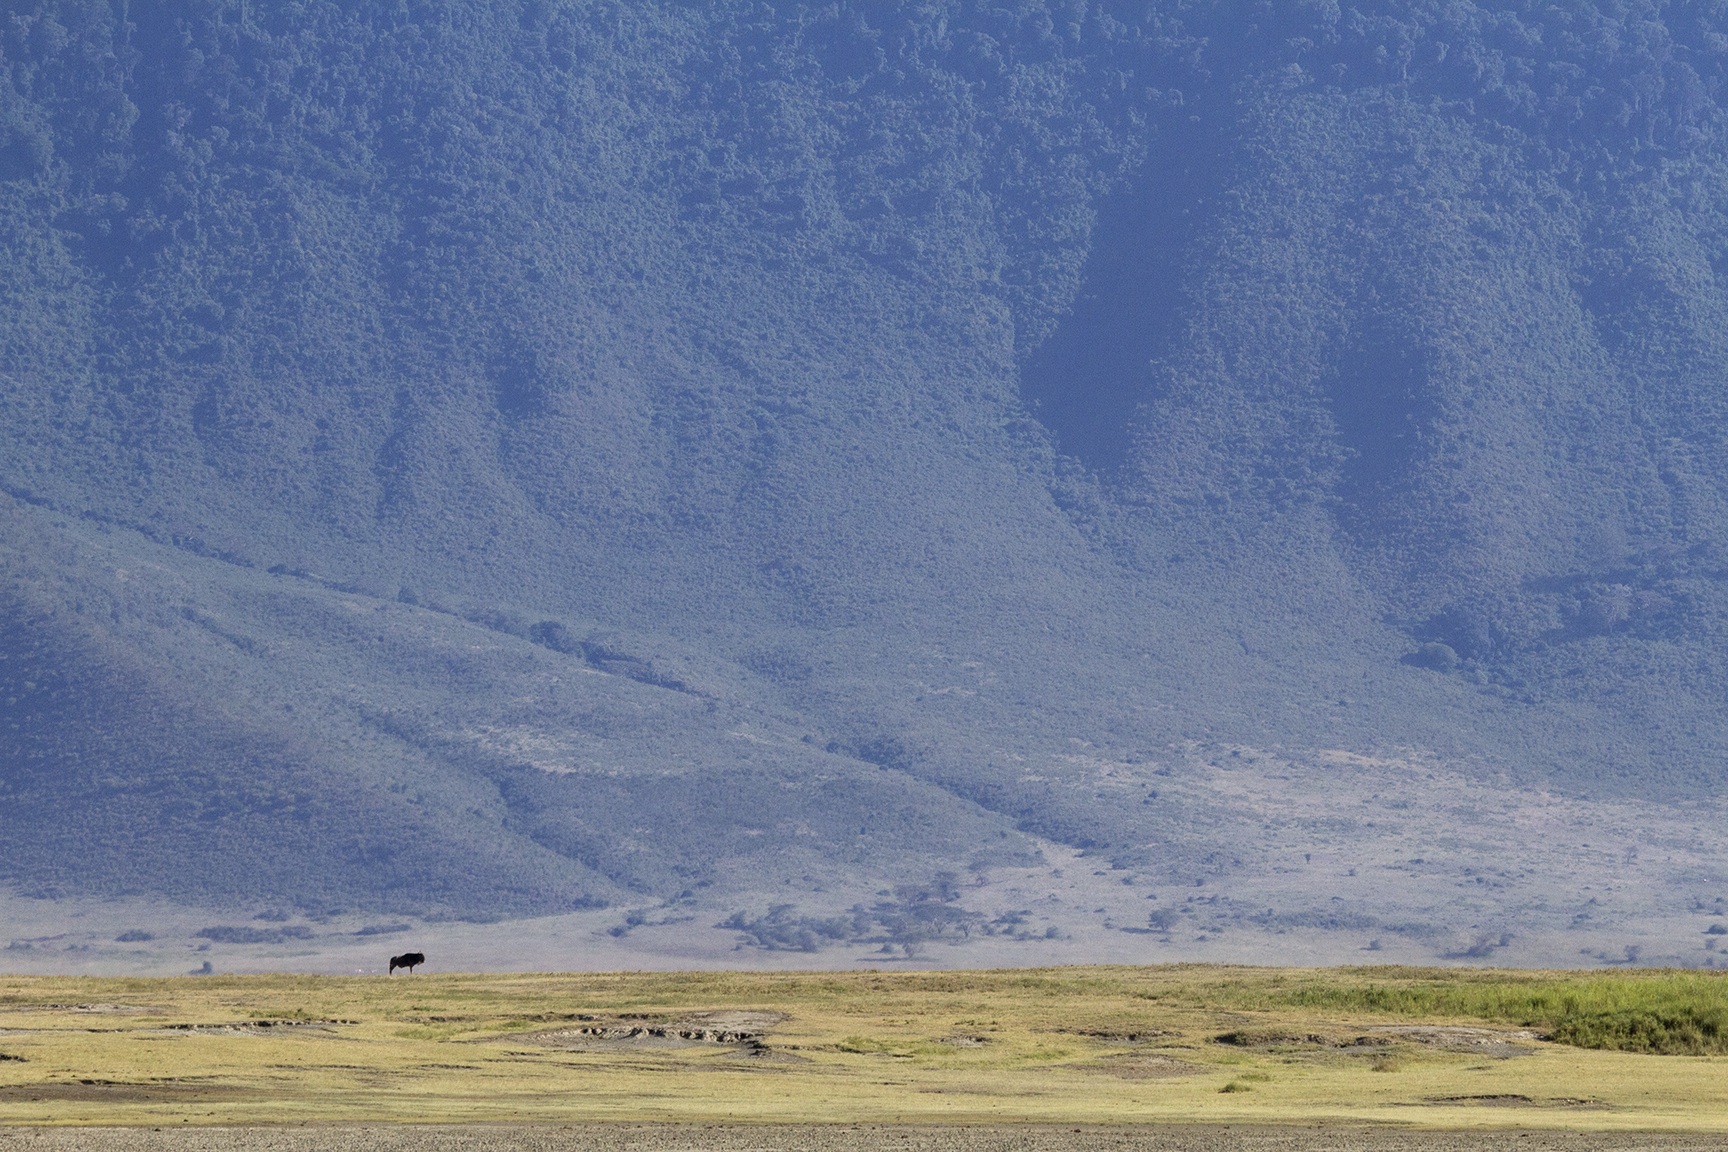 A lone wildebeest standing on the plains of Ngorongoro Crater set against the crater walls